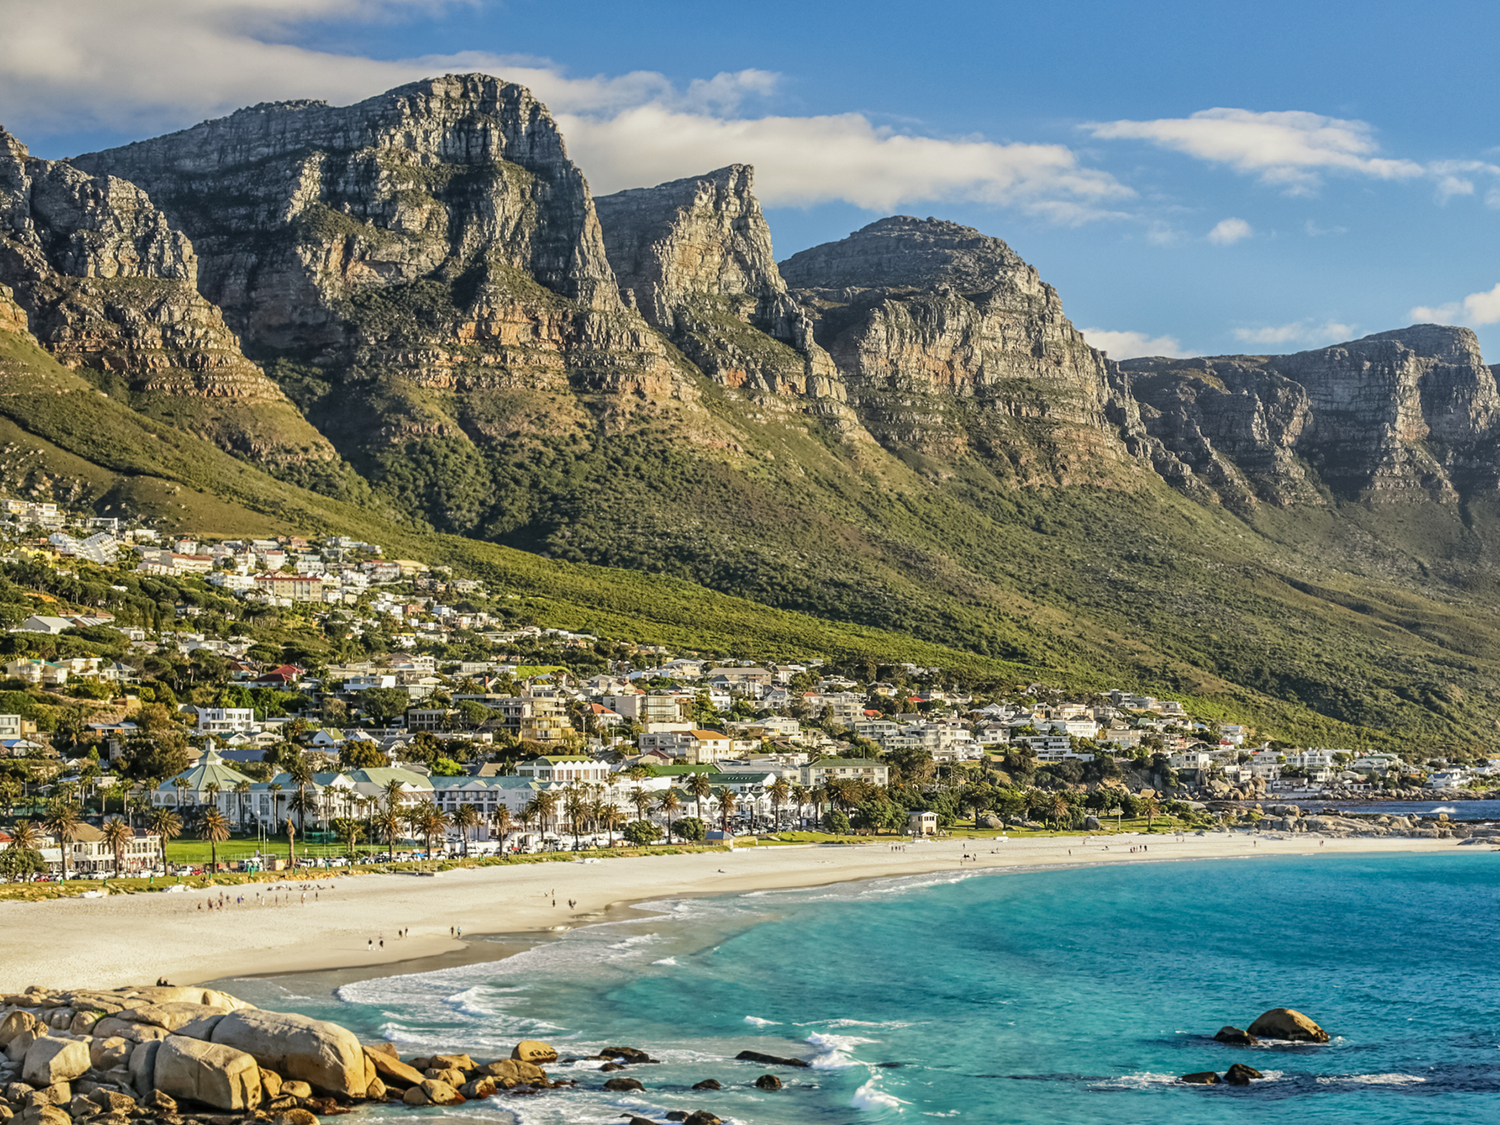 https://www.onthegotours.com/repository/The-beautiful-coastline-of-Cape-Town-644441529508629.jpg